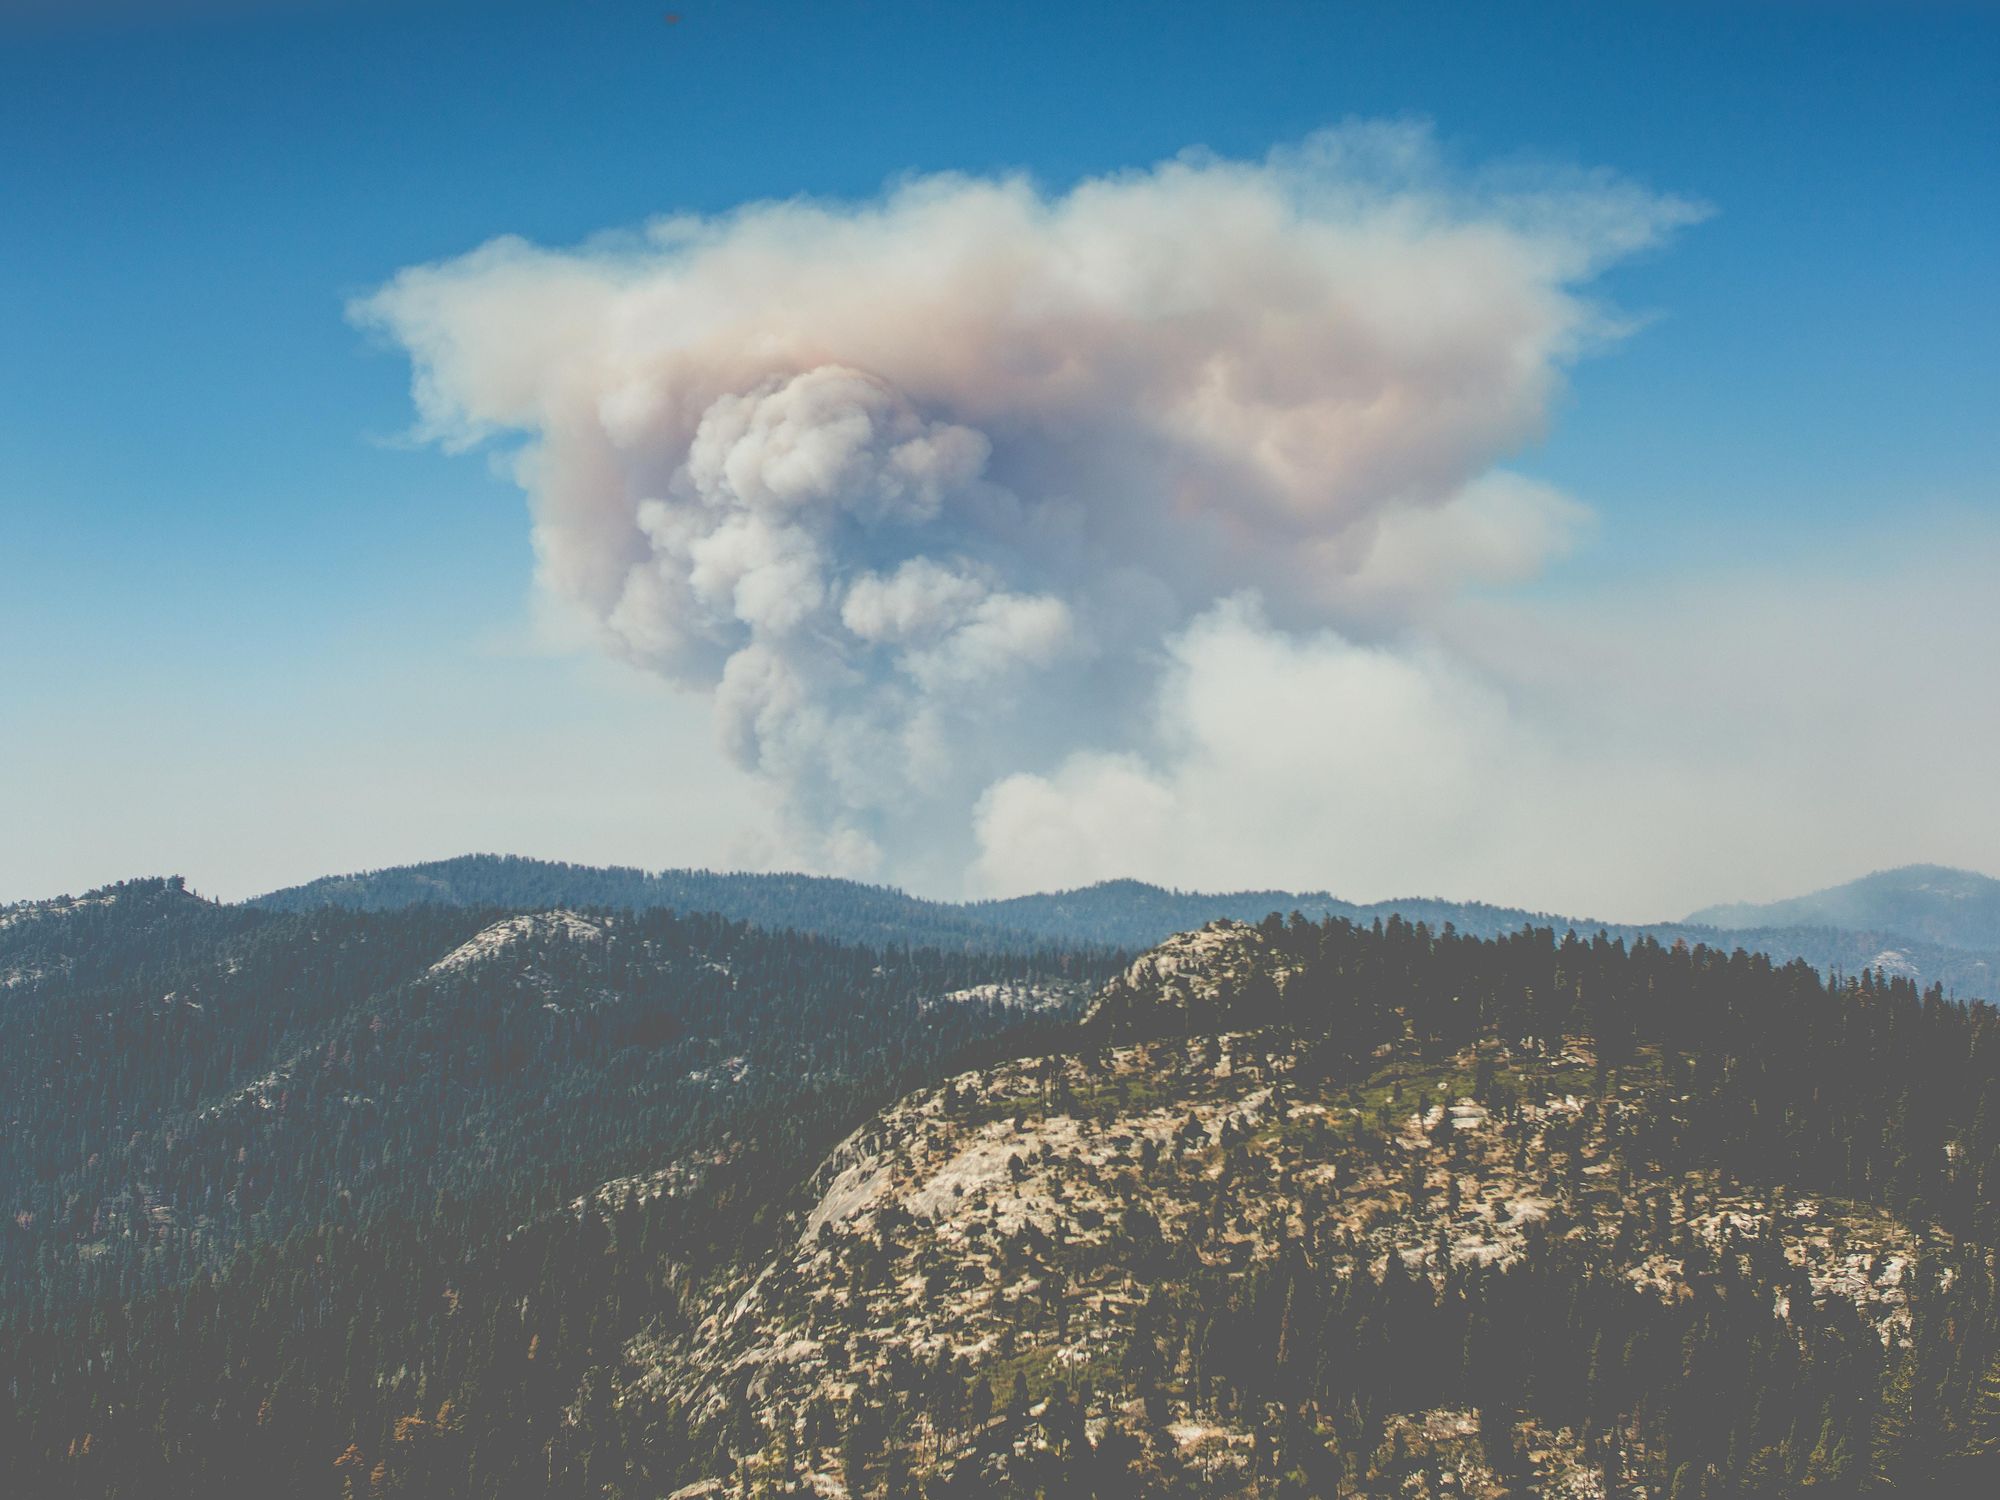 As California Wildfires Wear On, Firefighters Look to KSI's Drones for Help